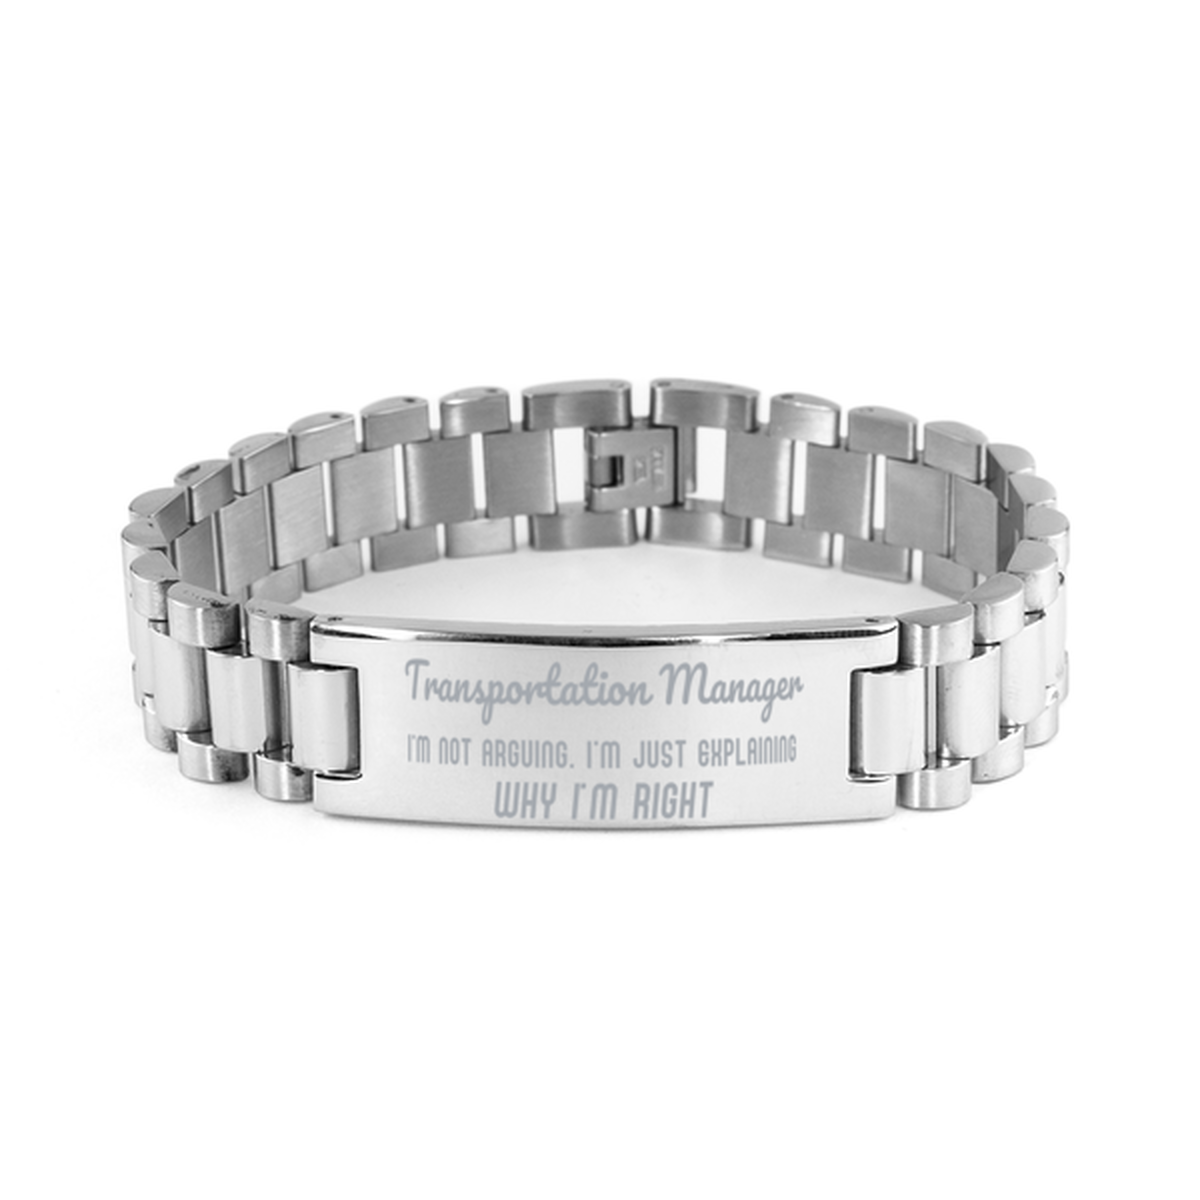 Transportation Manager I'm not Arguing. I'm Just Explaining Why I'm RIGHT Ladder Stainless Steel Bracelet, Graduation Birthday Christmas Transportation Manager Gifts For Transportation Manager Funny Saying Quote Present for Men Women Coworker